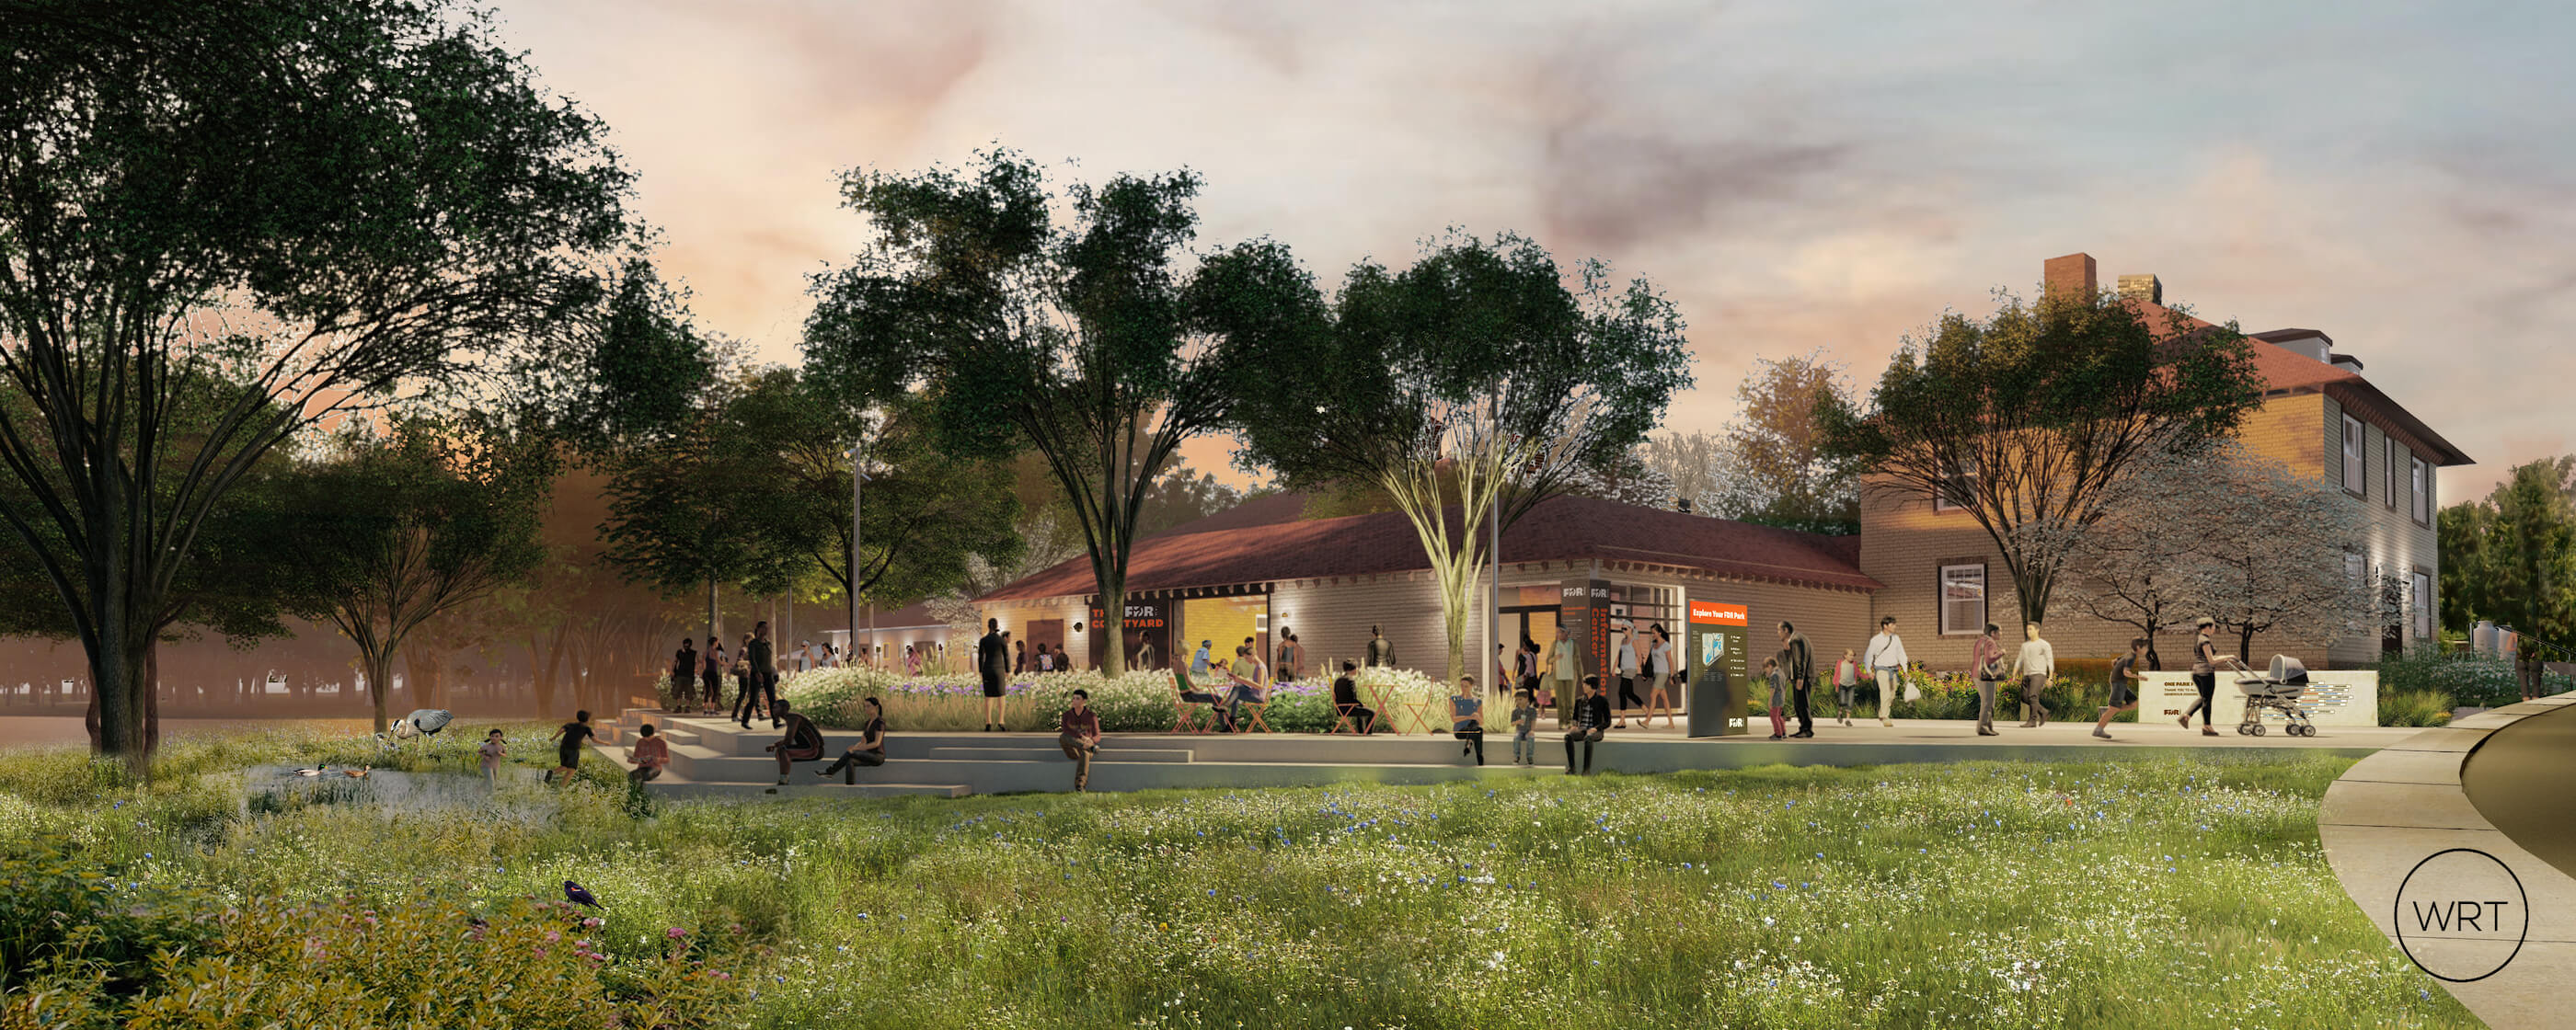 rendering of a visitors center in a park